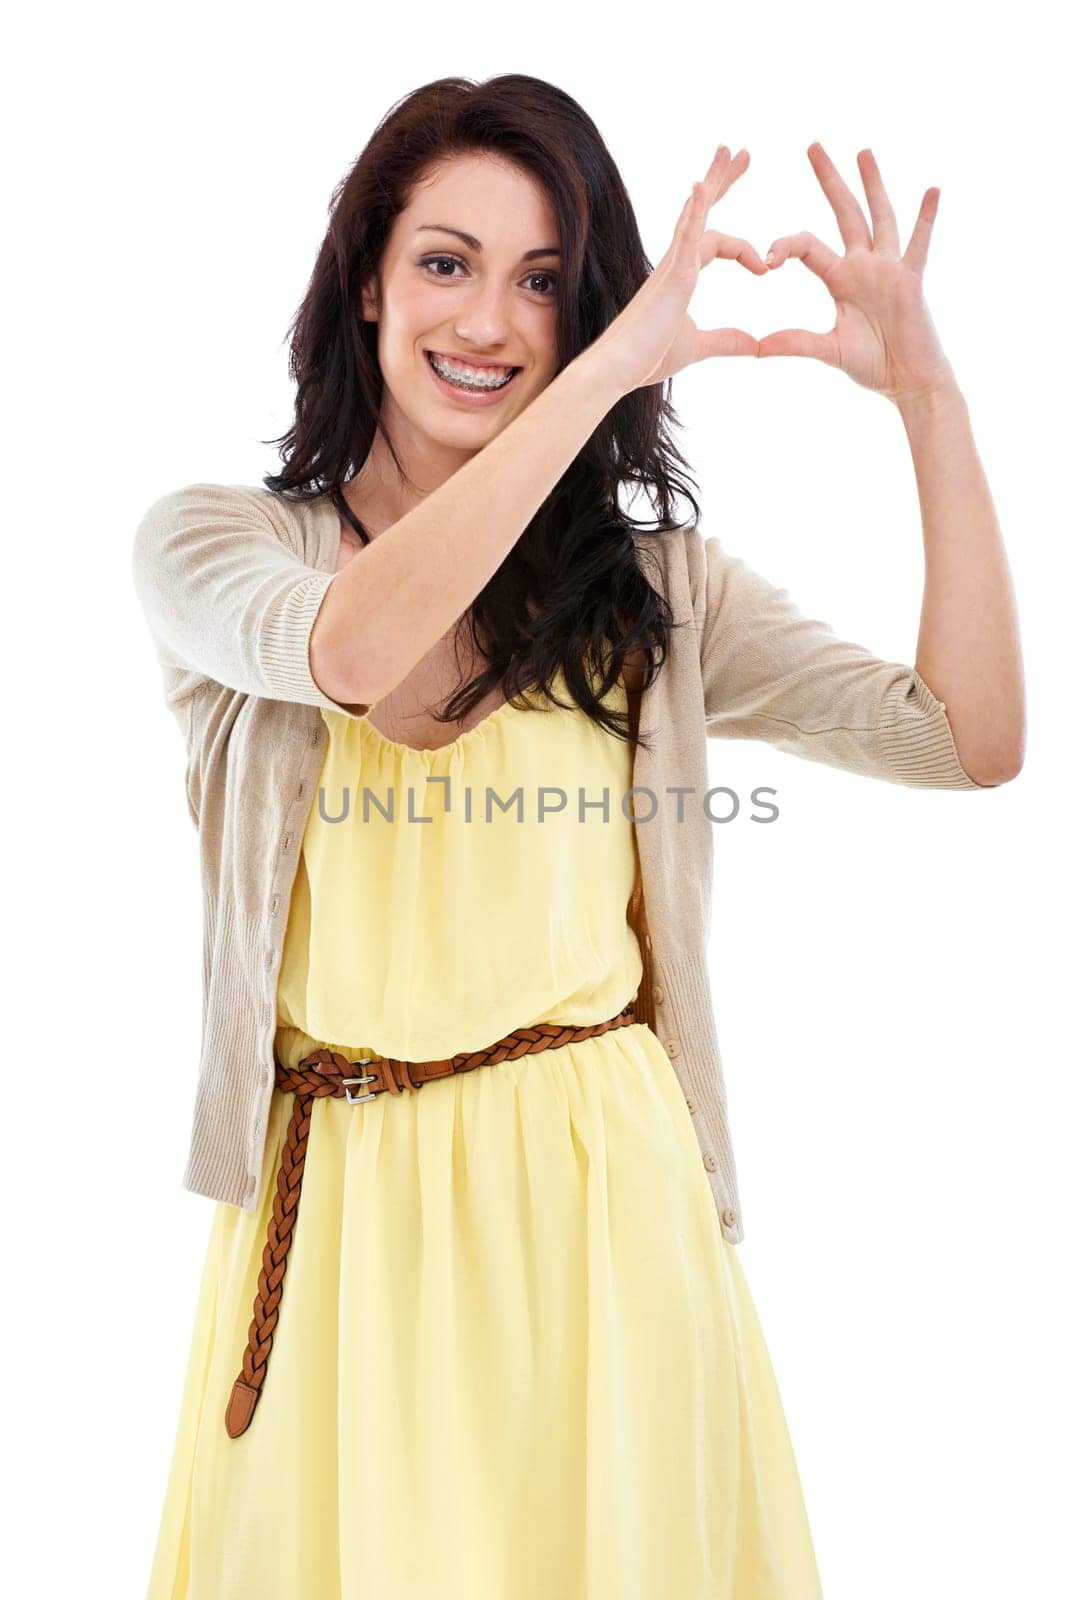 Woman, portrait and heart hands for thank you in studio, kindness and peace emoji or symbol. Happy female person, support icon and smiling on white background, romance emoticon and gratitude for care.